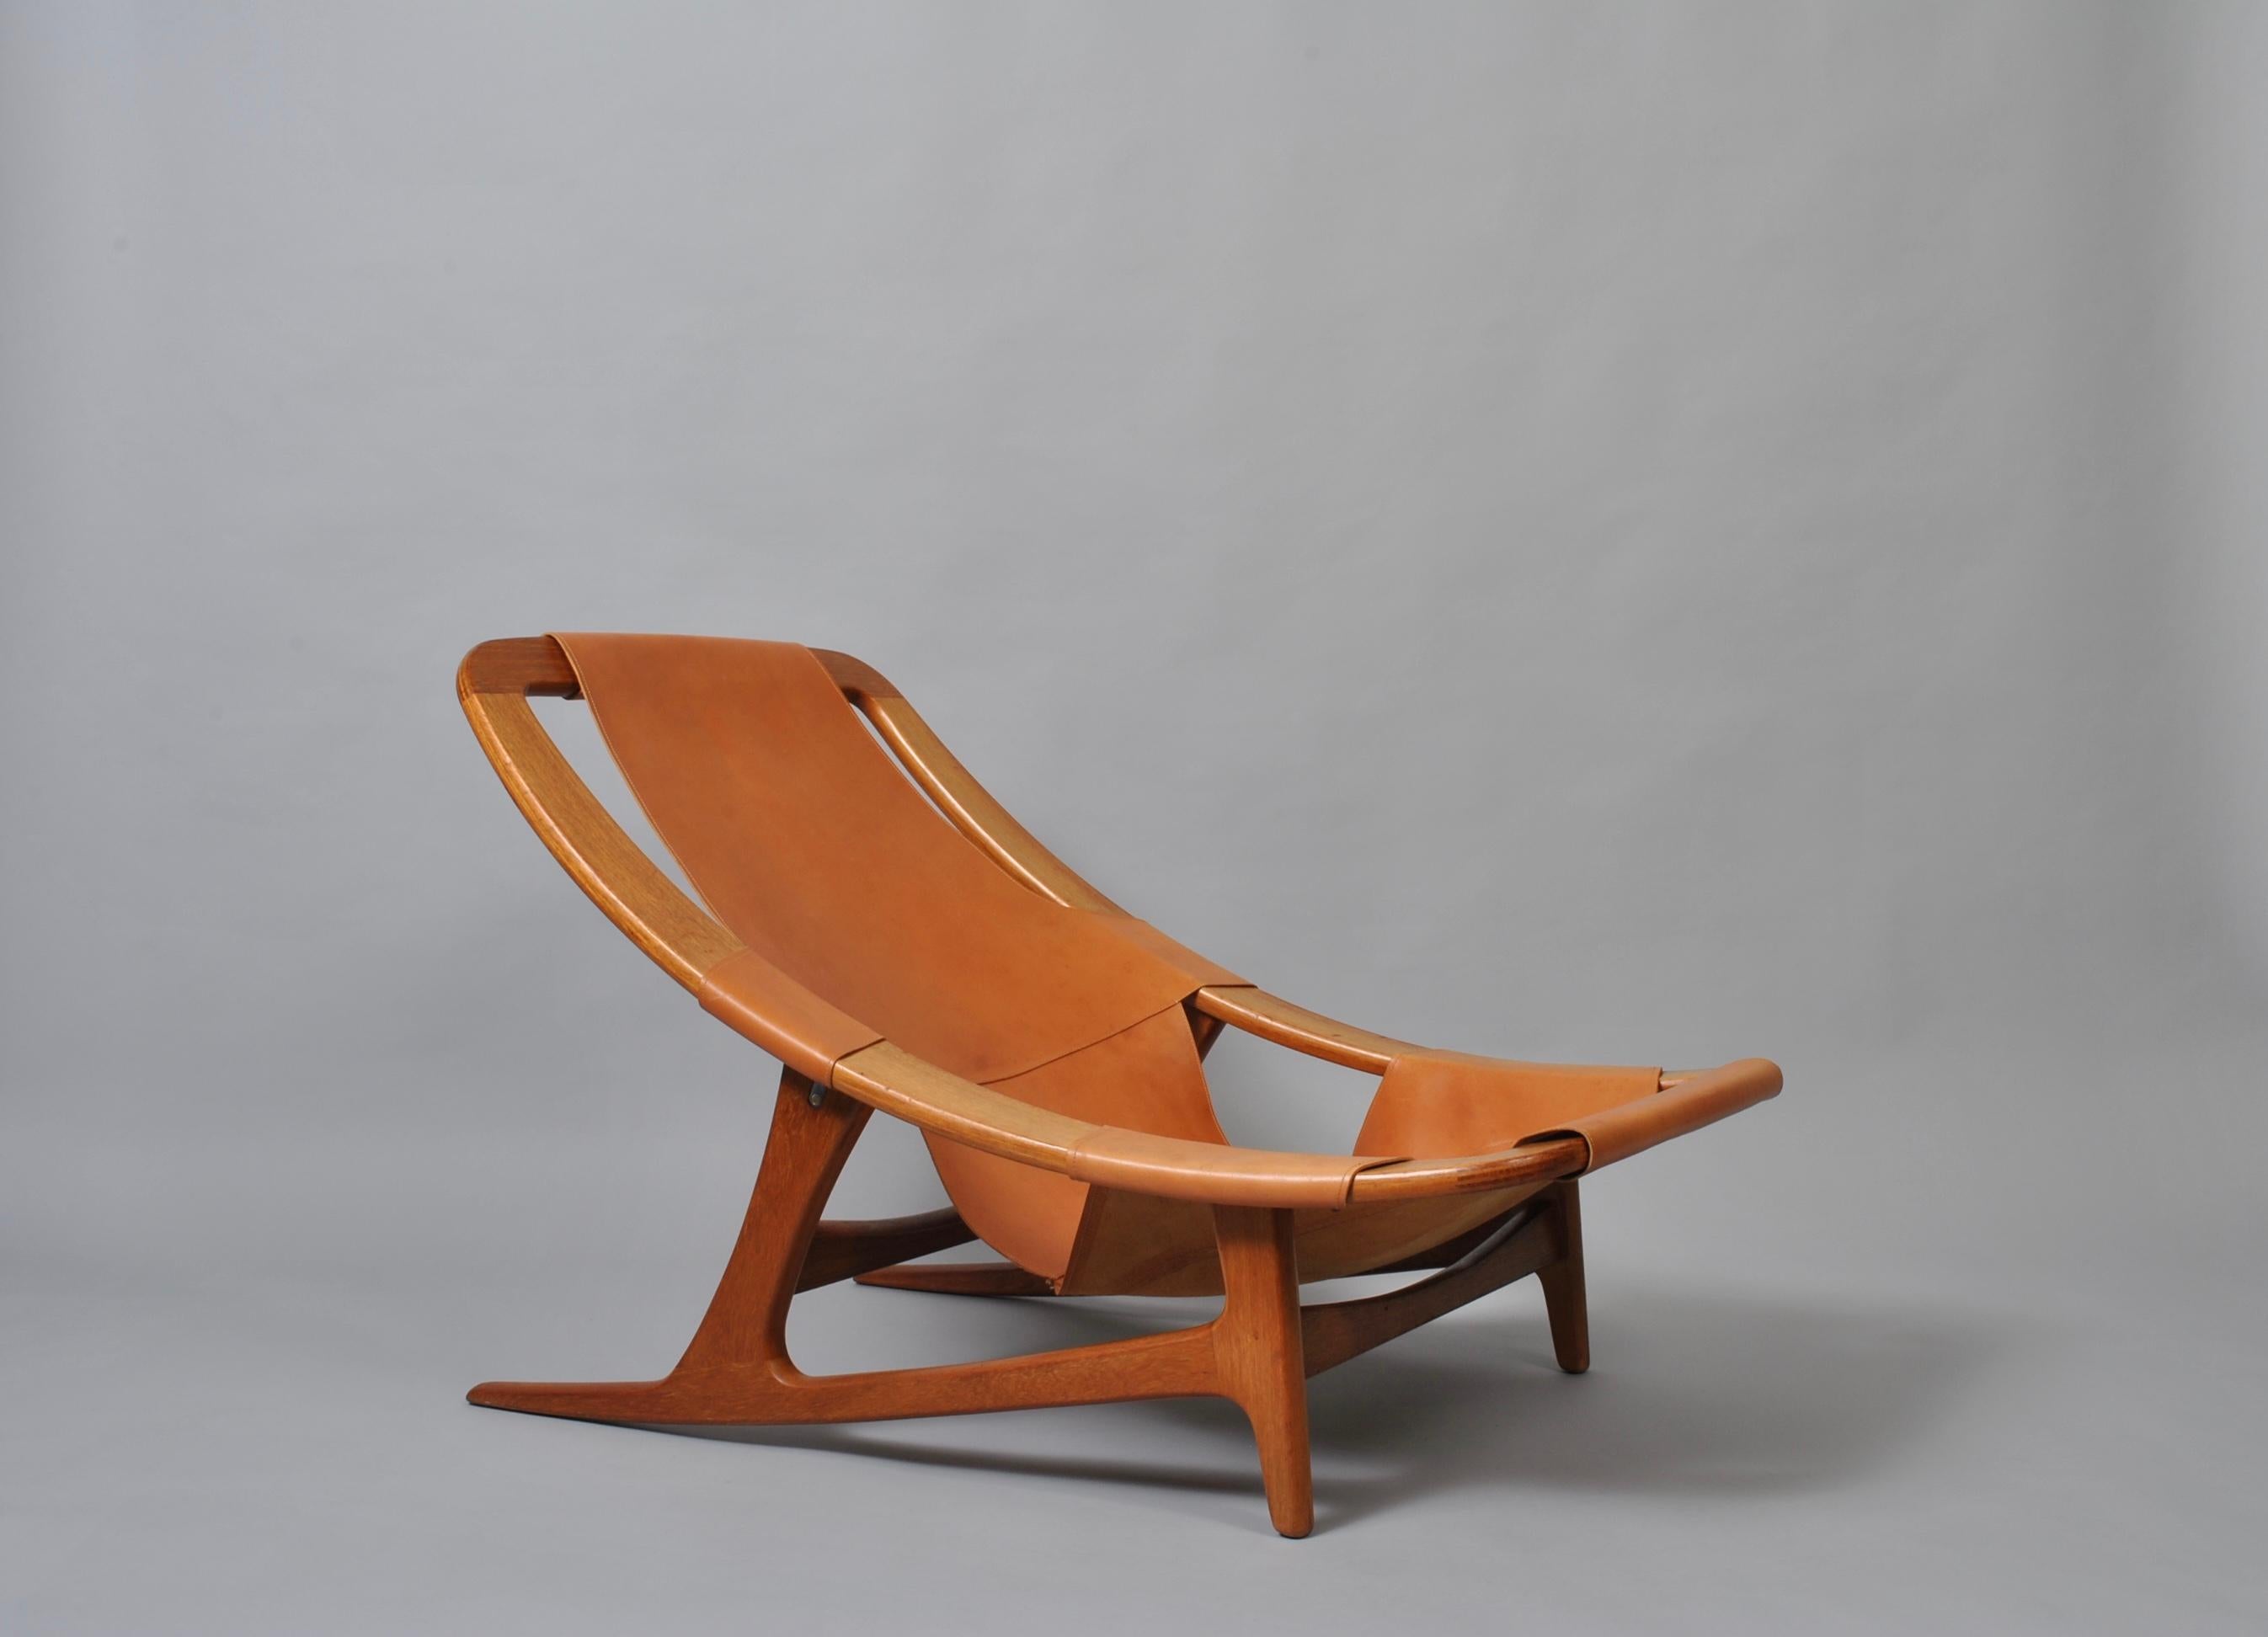 Incredible Nordic hunter chair by Arne Tidemand Ruud. Rare Model ‘Holmenkollen’. Produced by Norcraft, Norway in 1959. Superb streamline design by Ruud with tan saddle leather upholstery within the curved oak frame. The chair has 2 seating positions